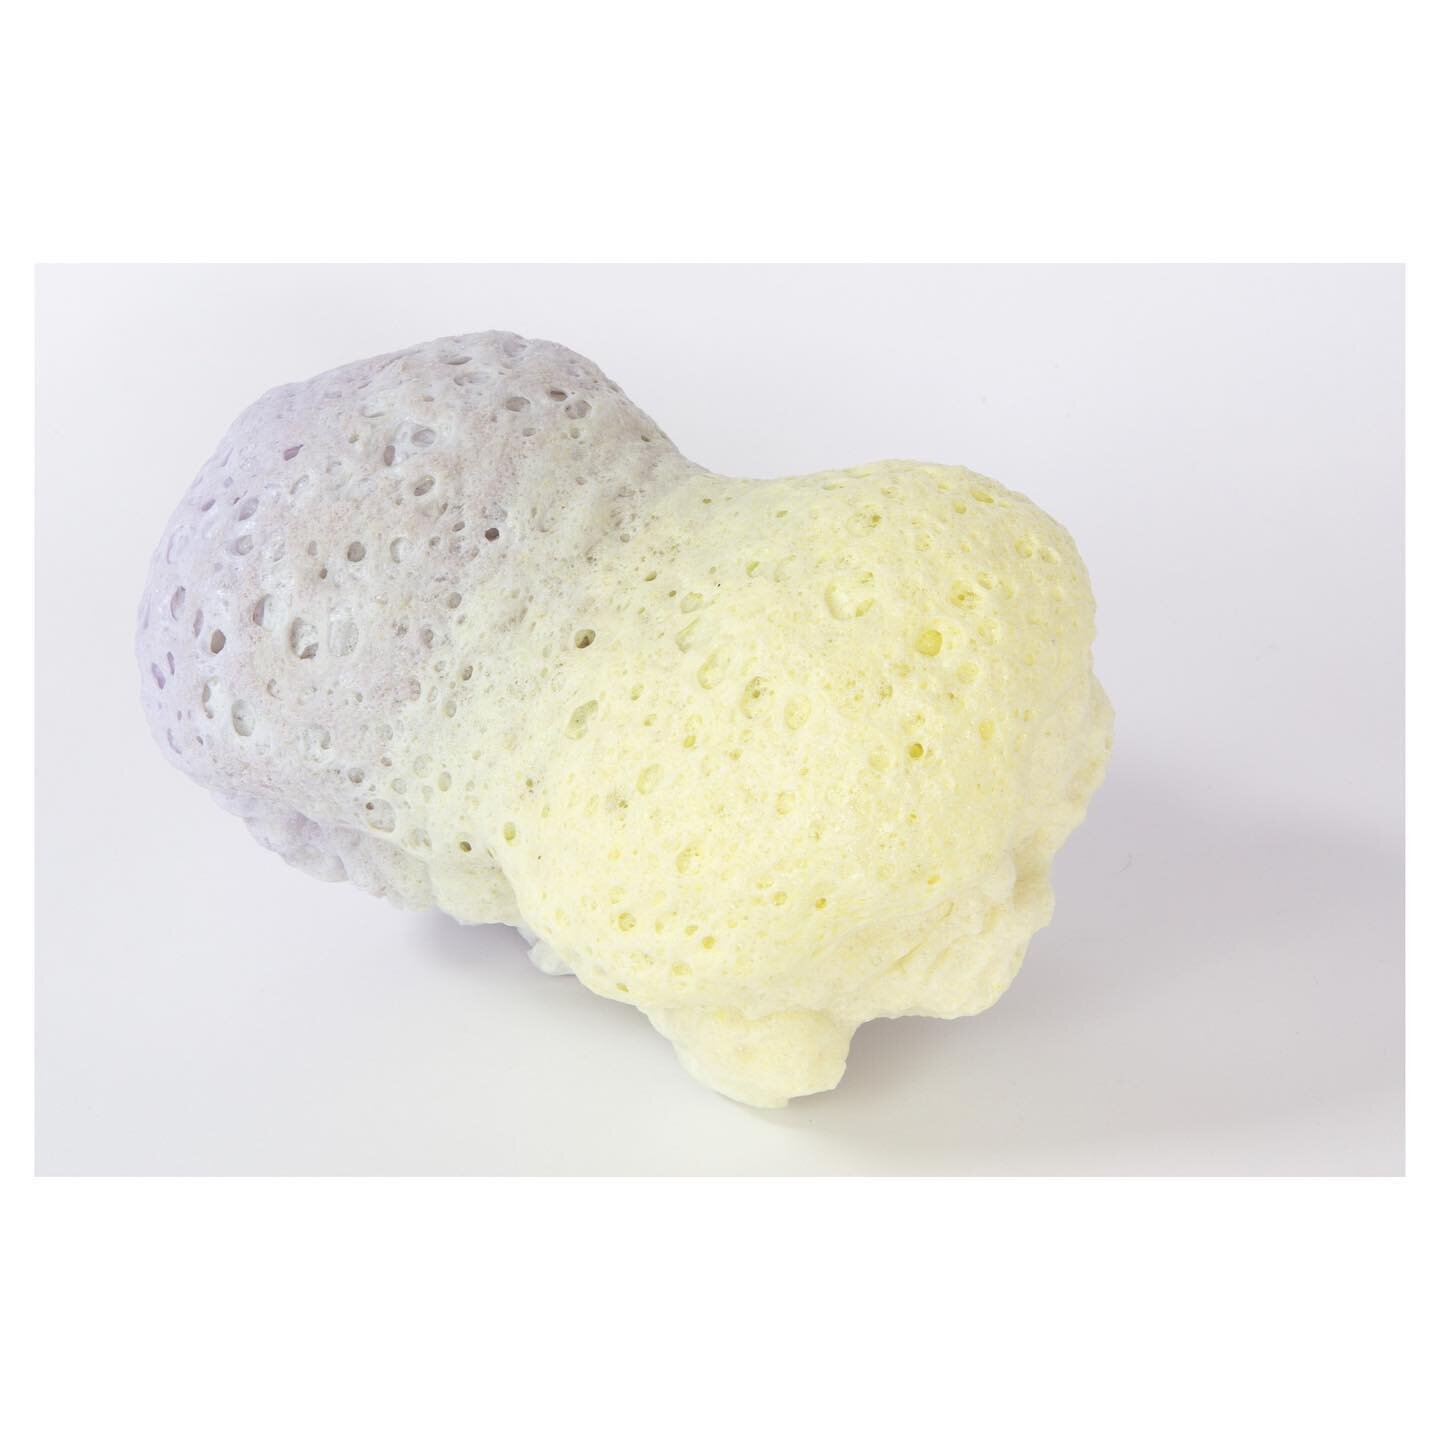 Just one more from @collectartfair, which I didn&rsquo;t get the chance to share during the fair; &rsquo;Porifera I&rsquo;, cast glass with foaming agent. Thanks to @bullseyeprojects for having me and thank you to everyone that came to look at the wo